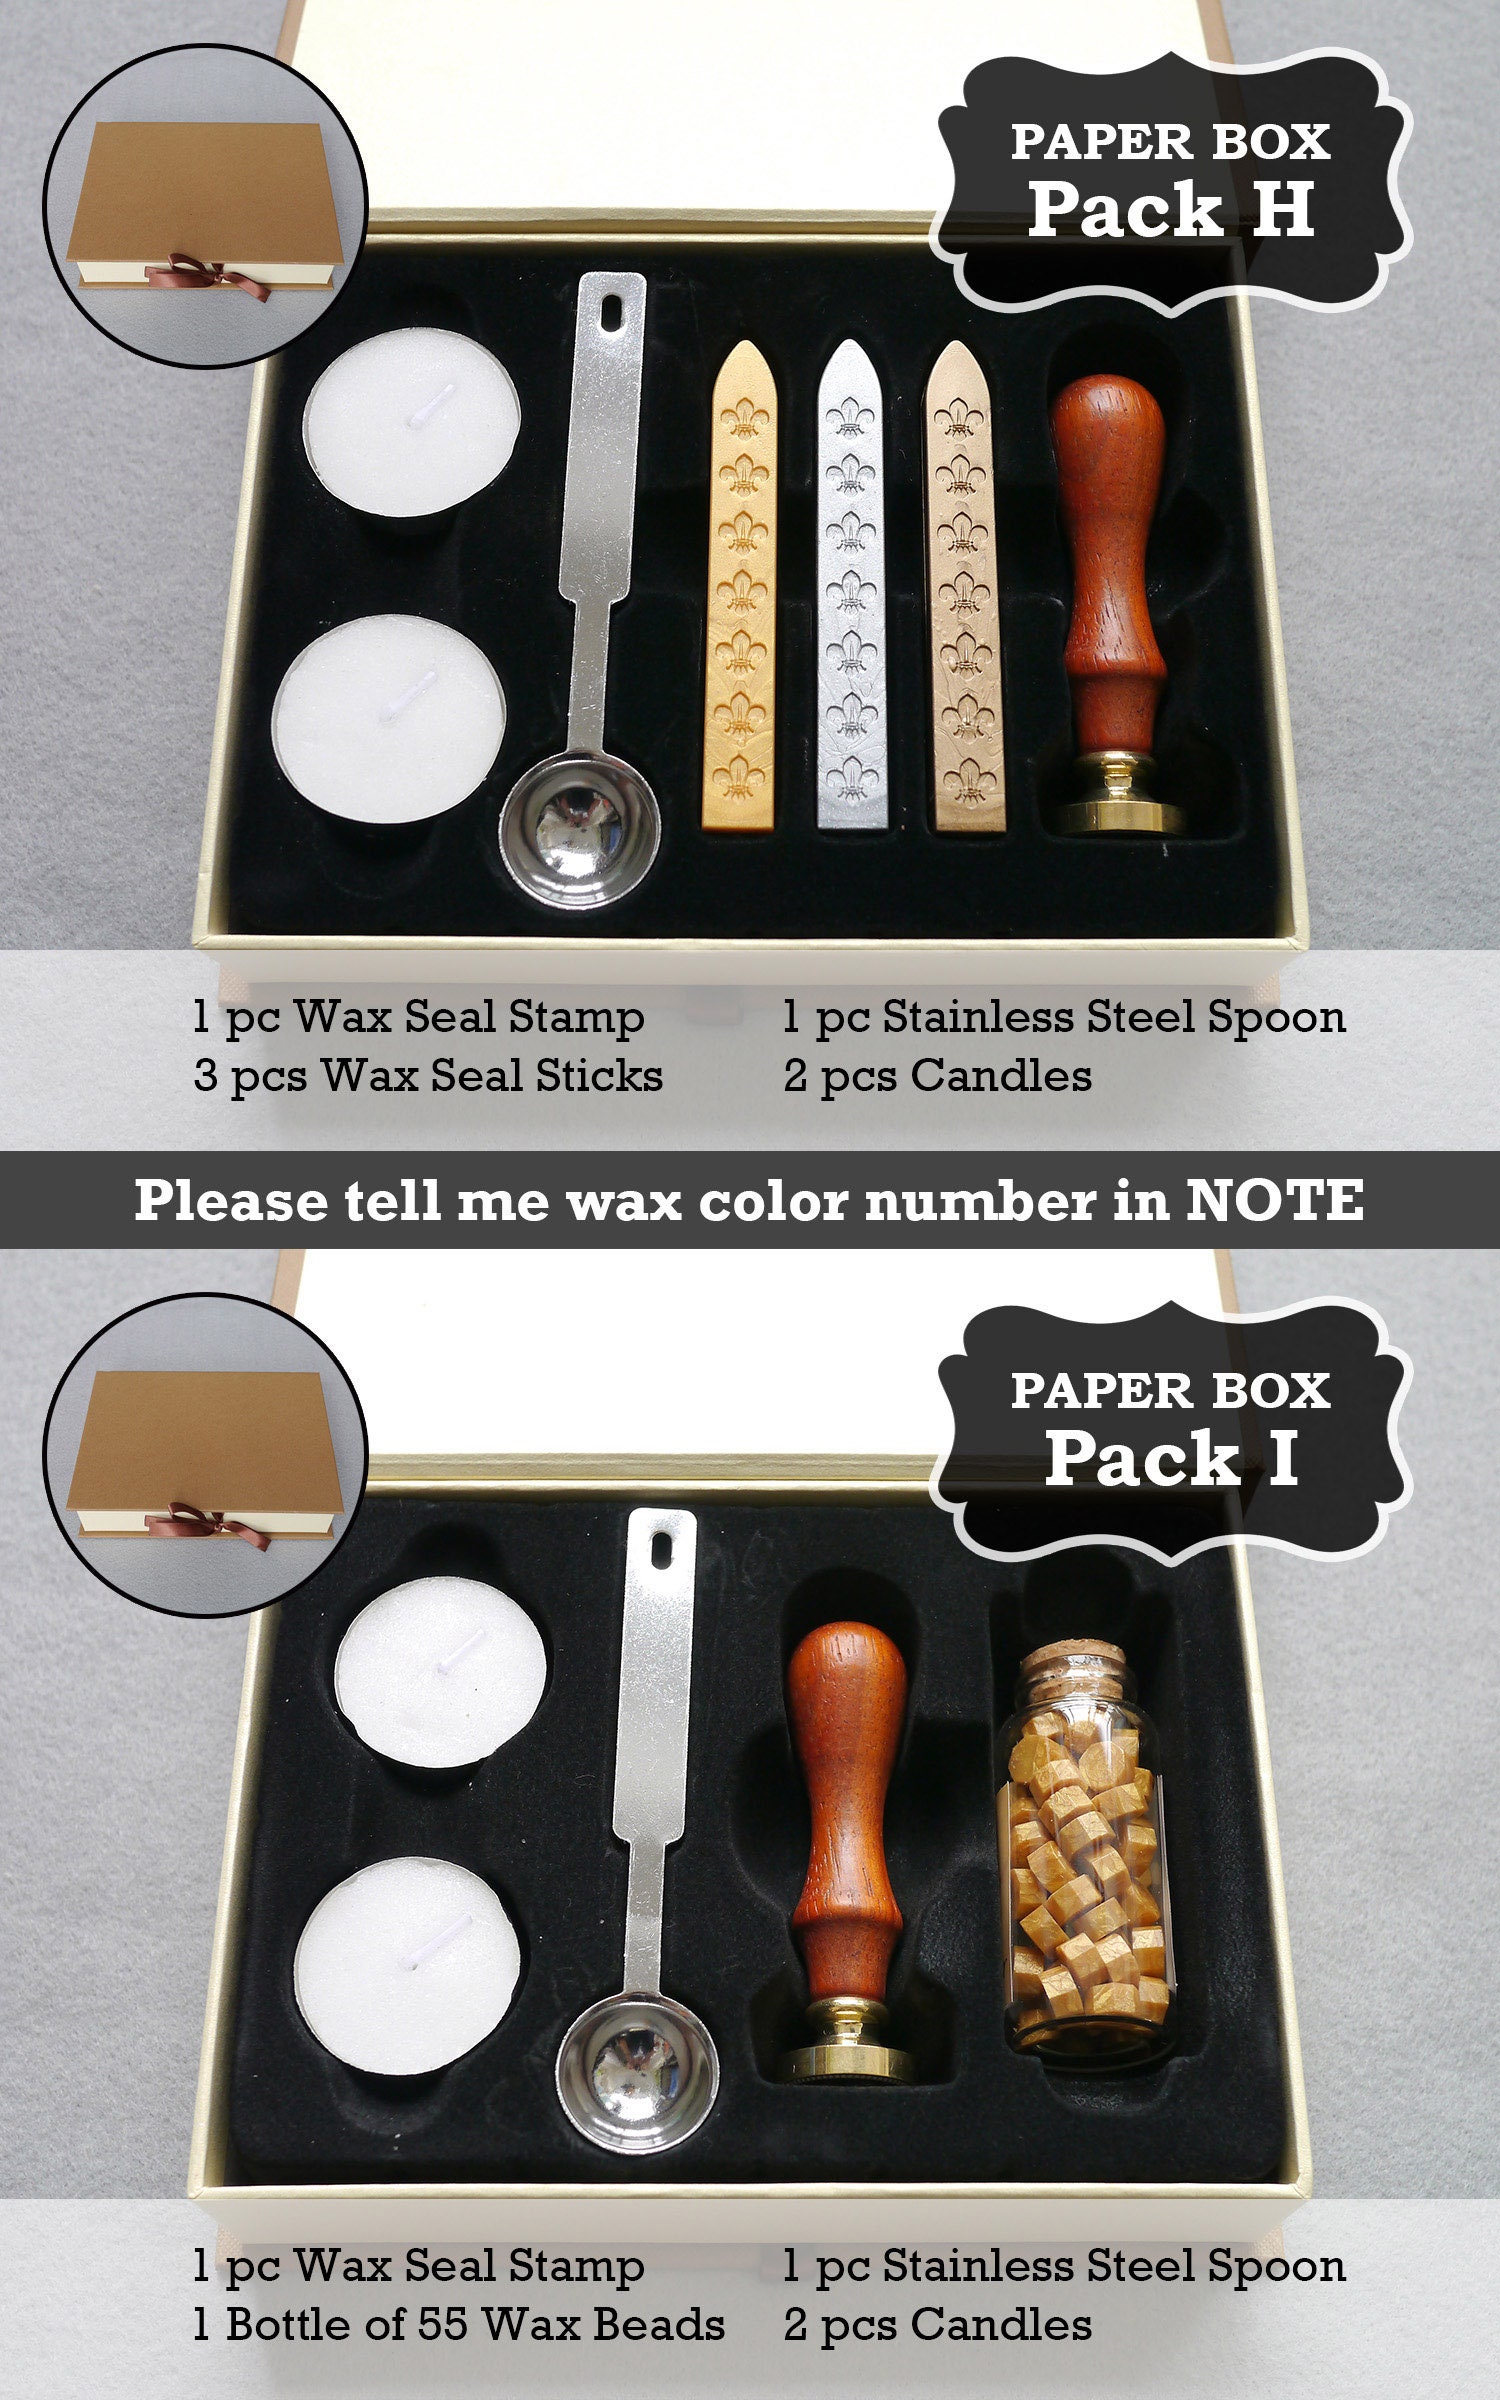 How to Use Sealing Wax Sticks with a Glue Gun or Spoon - The Paperbox